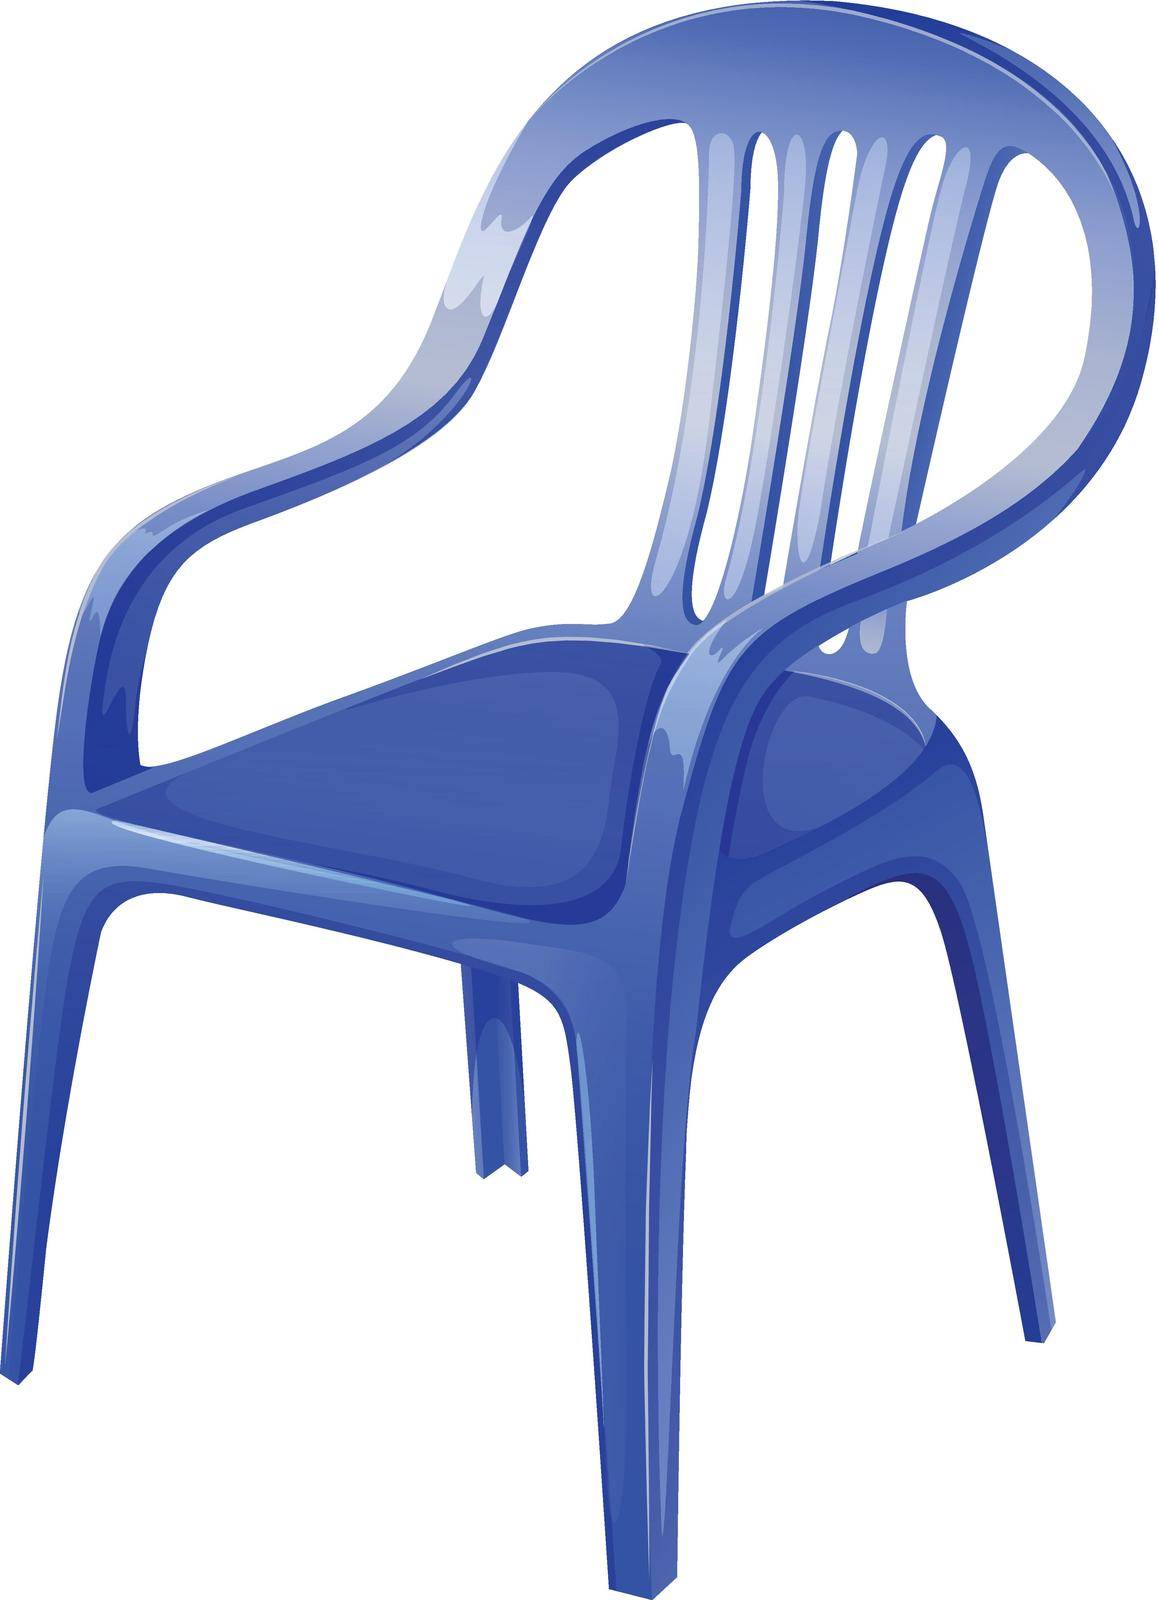 A blue chair by iimages